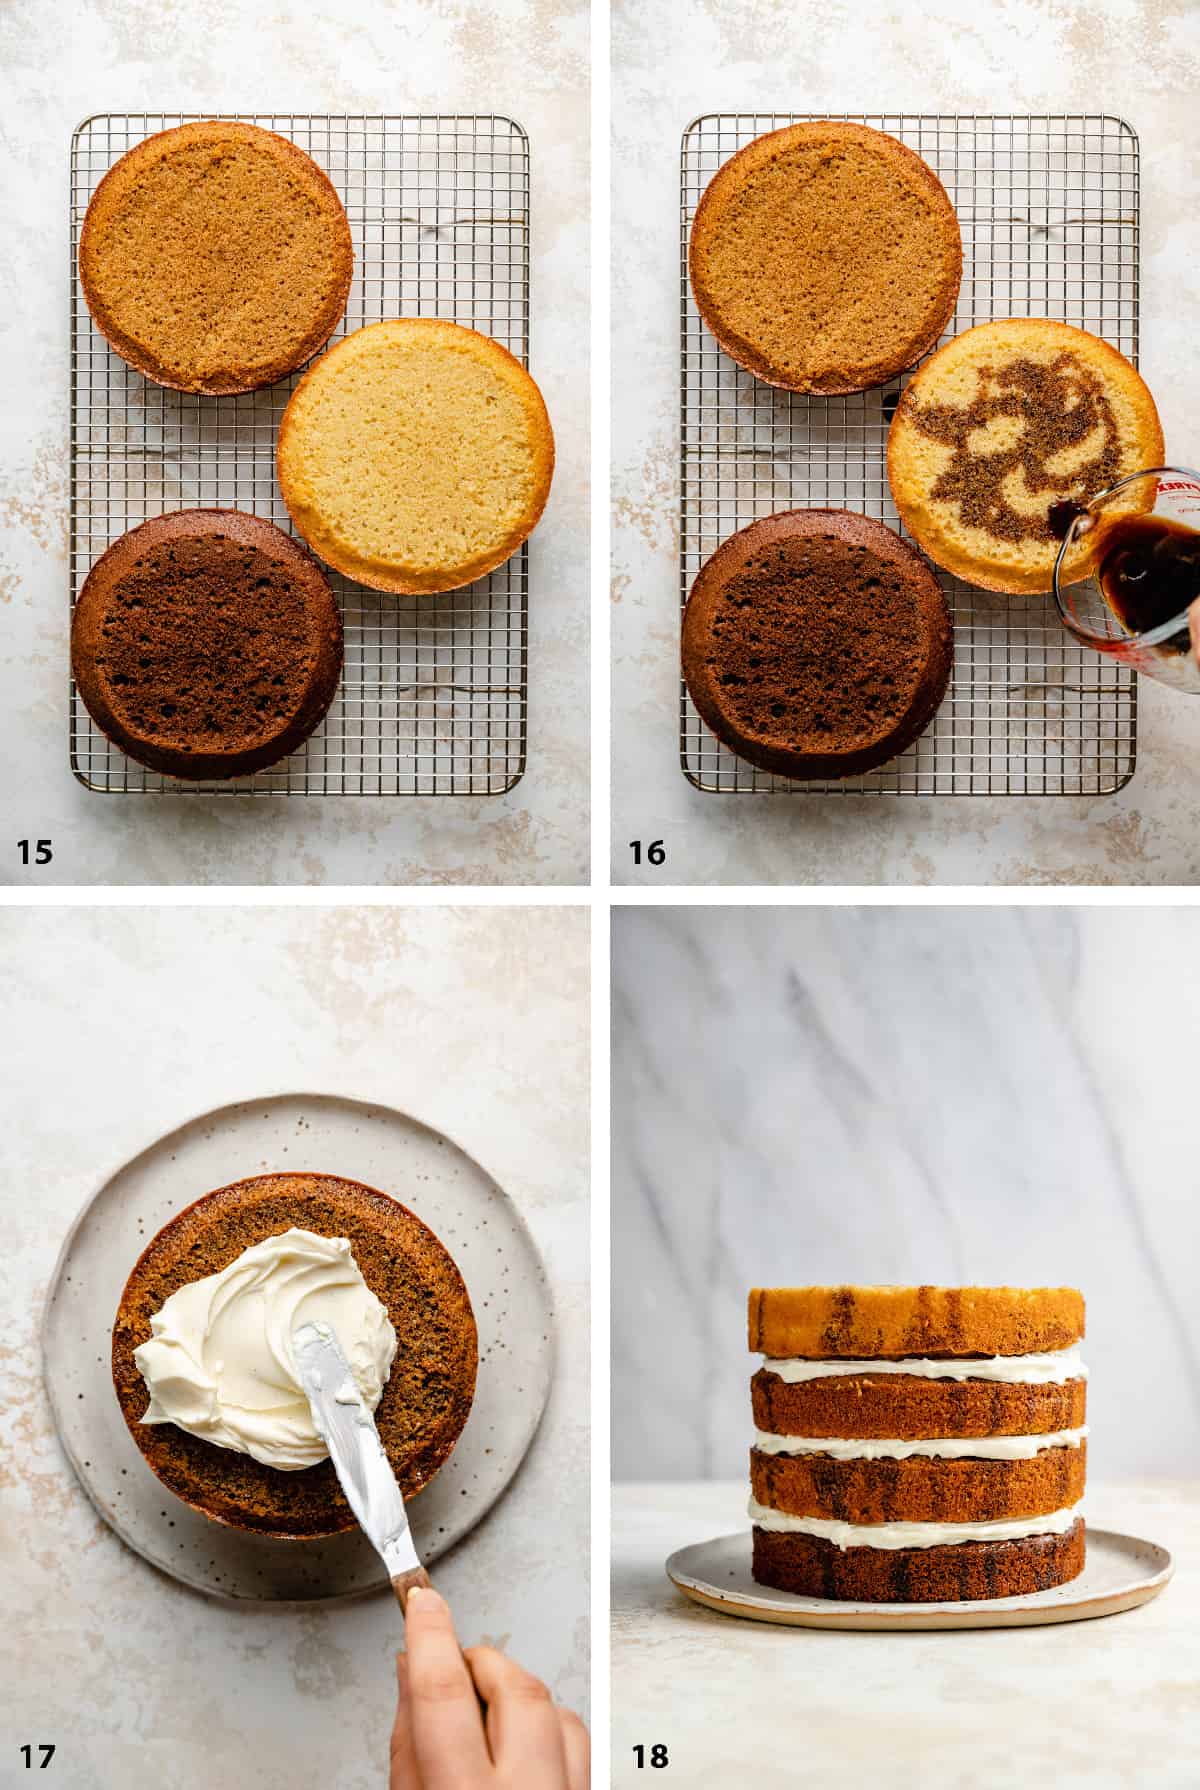 Process of levelling cakes, soaking in syrup and layering with mascarpone frosting.